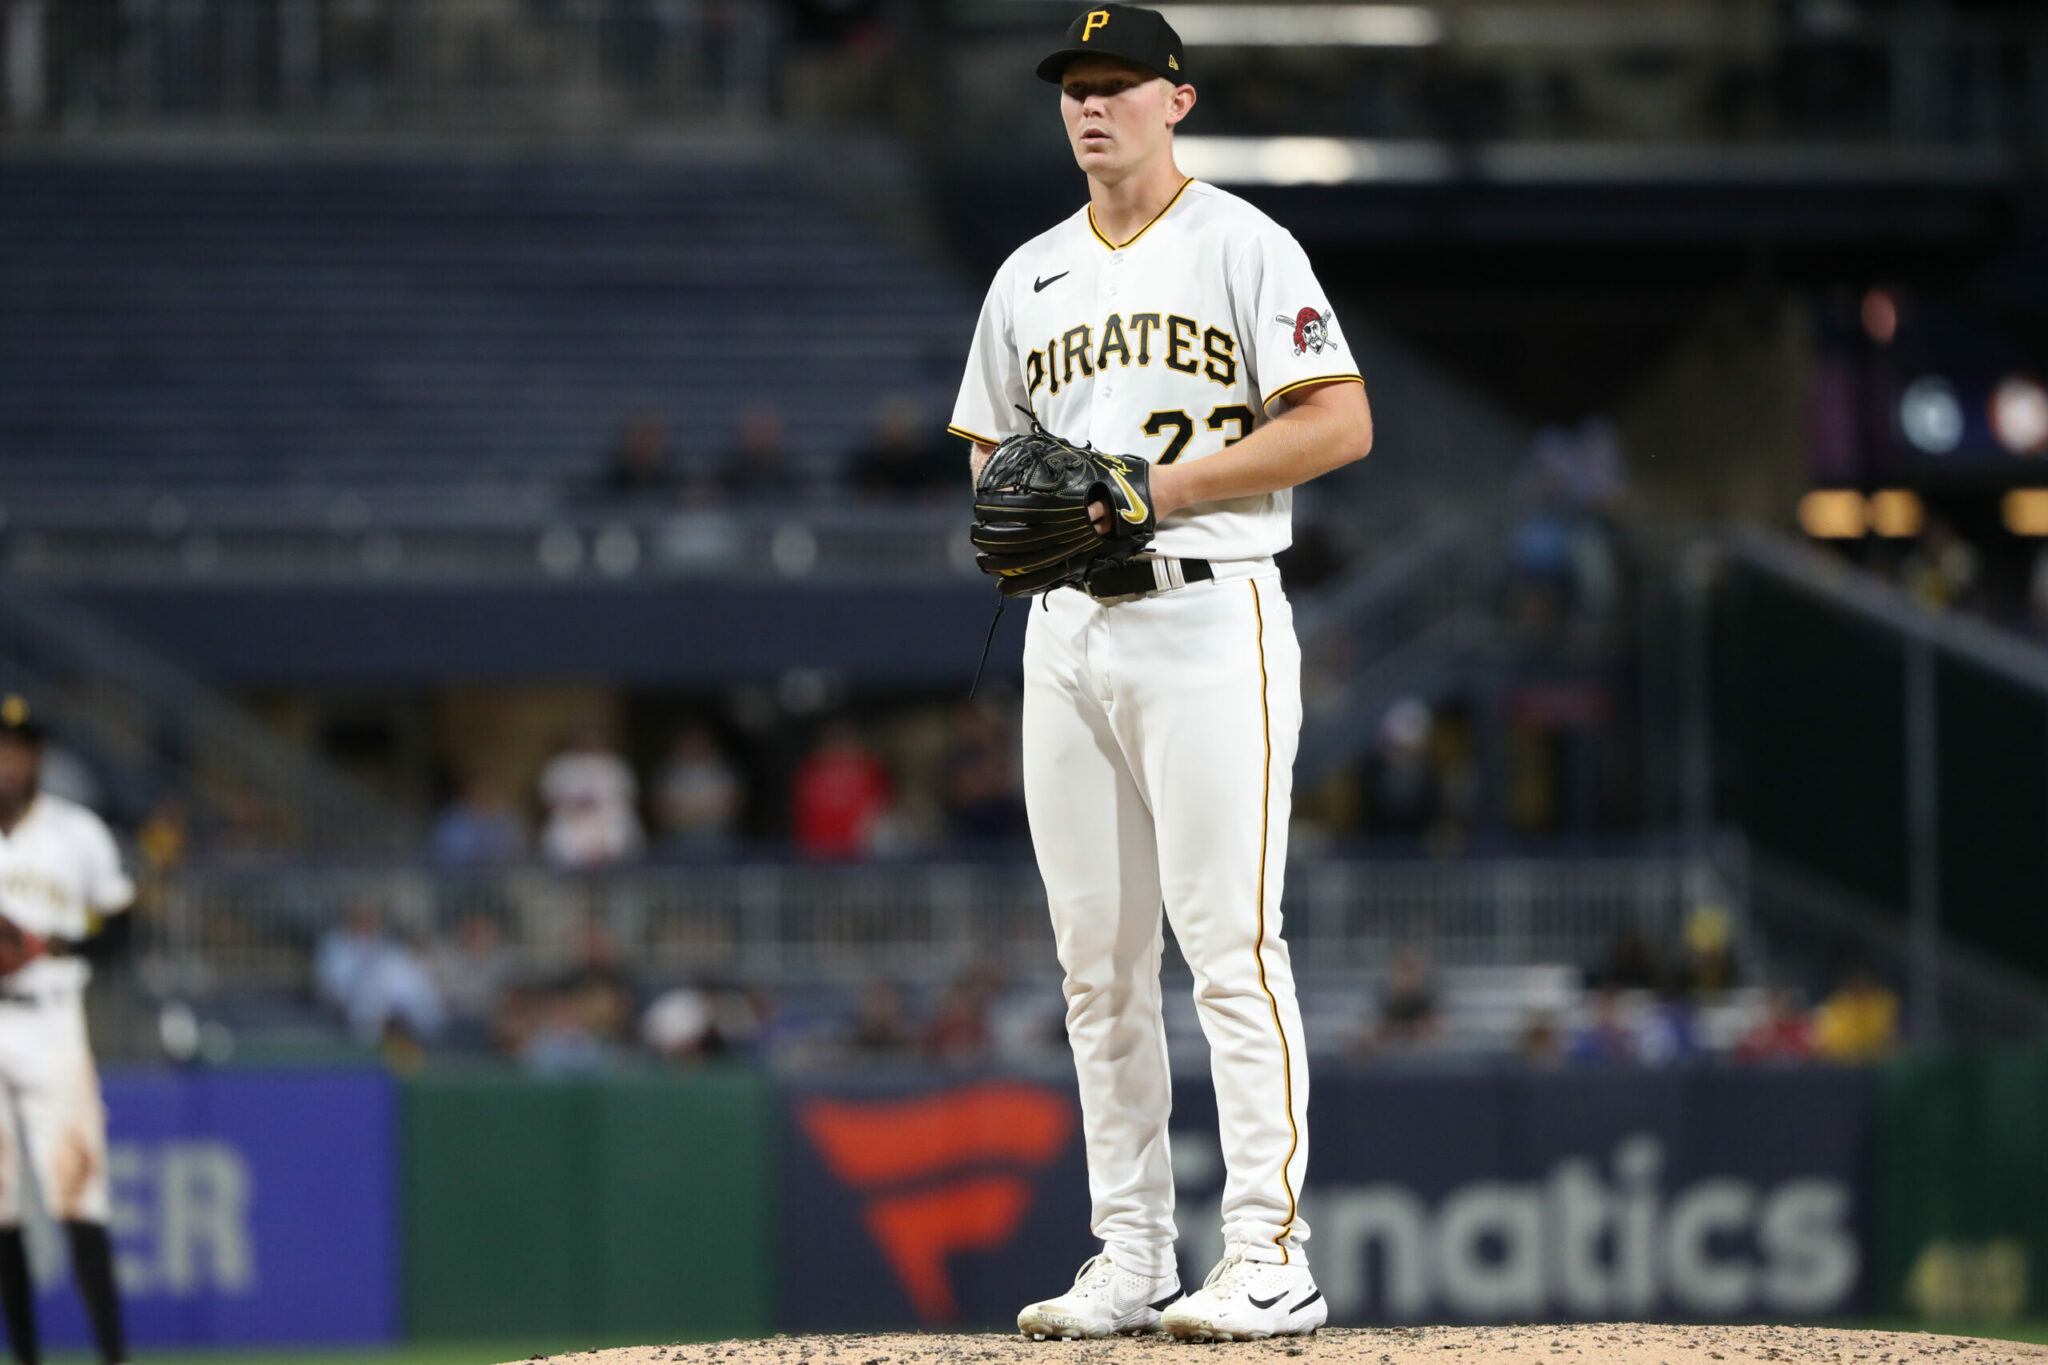 Pirates Prospects Daily: Six Observations, Six Games Into The Season